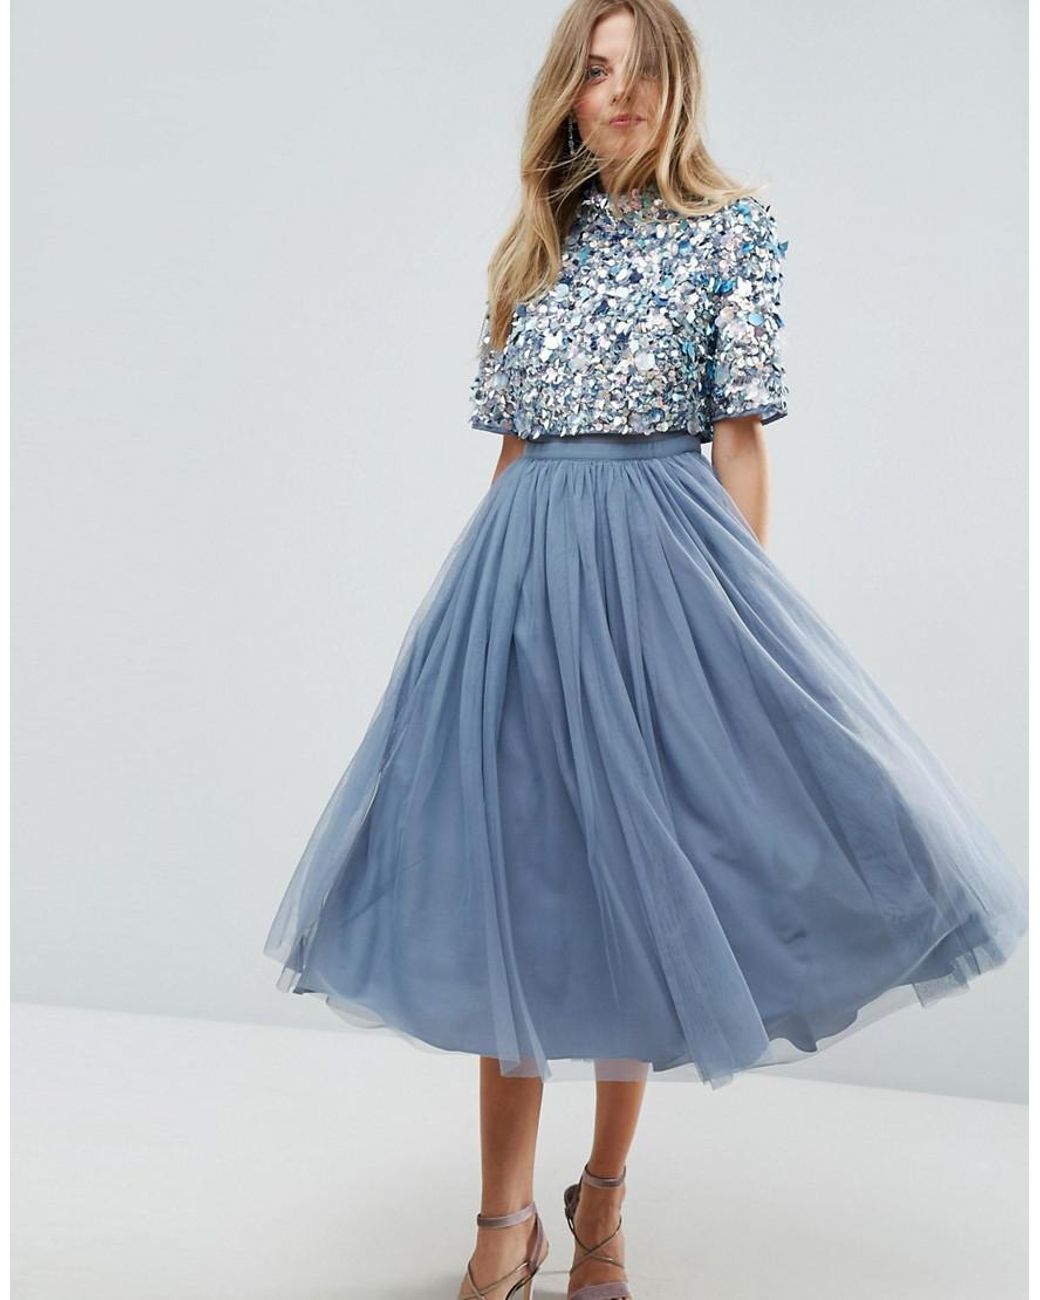 ASOS High Neck Embellished Crop Top Tulle Midi Dress in Blue | Lyst